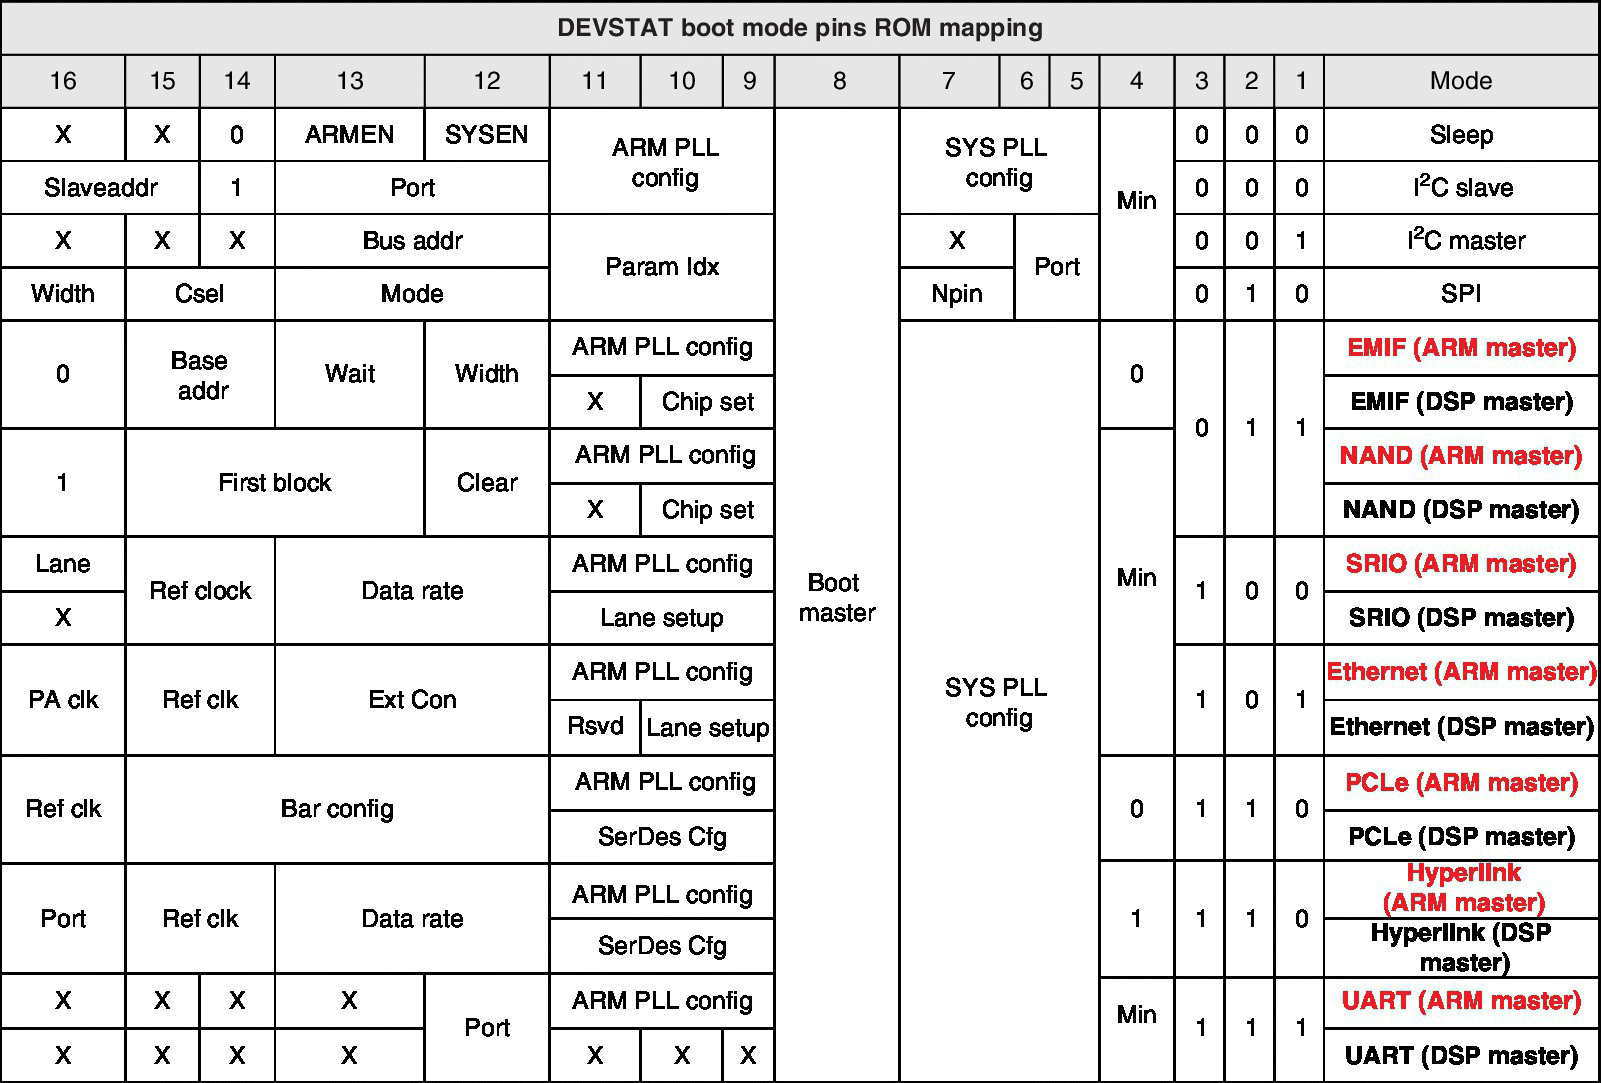 Tabular chart of DEVSTAT boot mode pins ROM mapping with boots for 0 and 1.